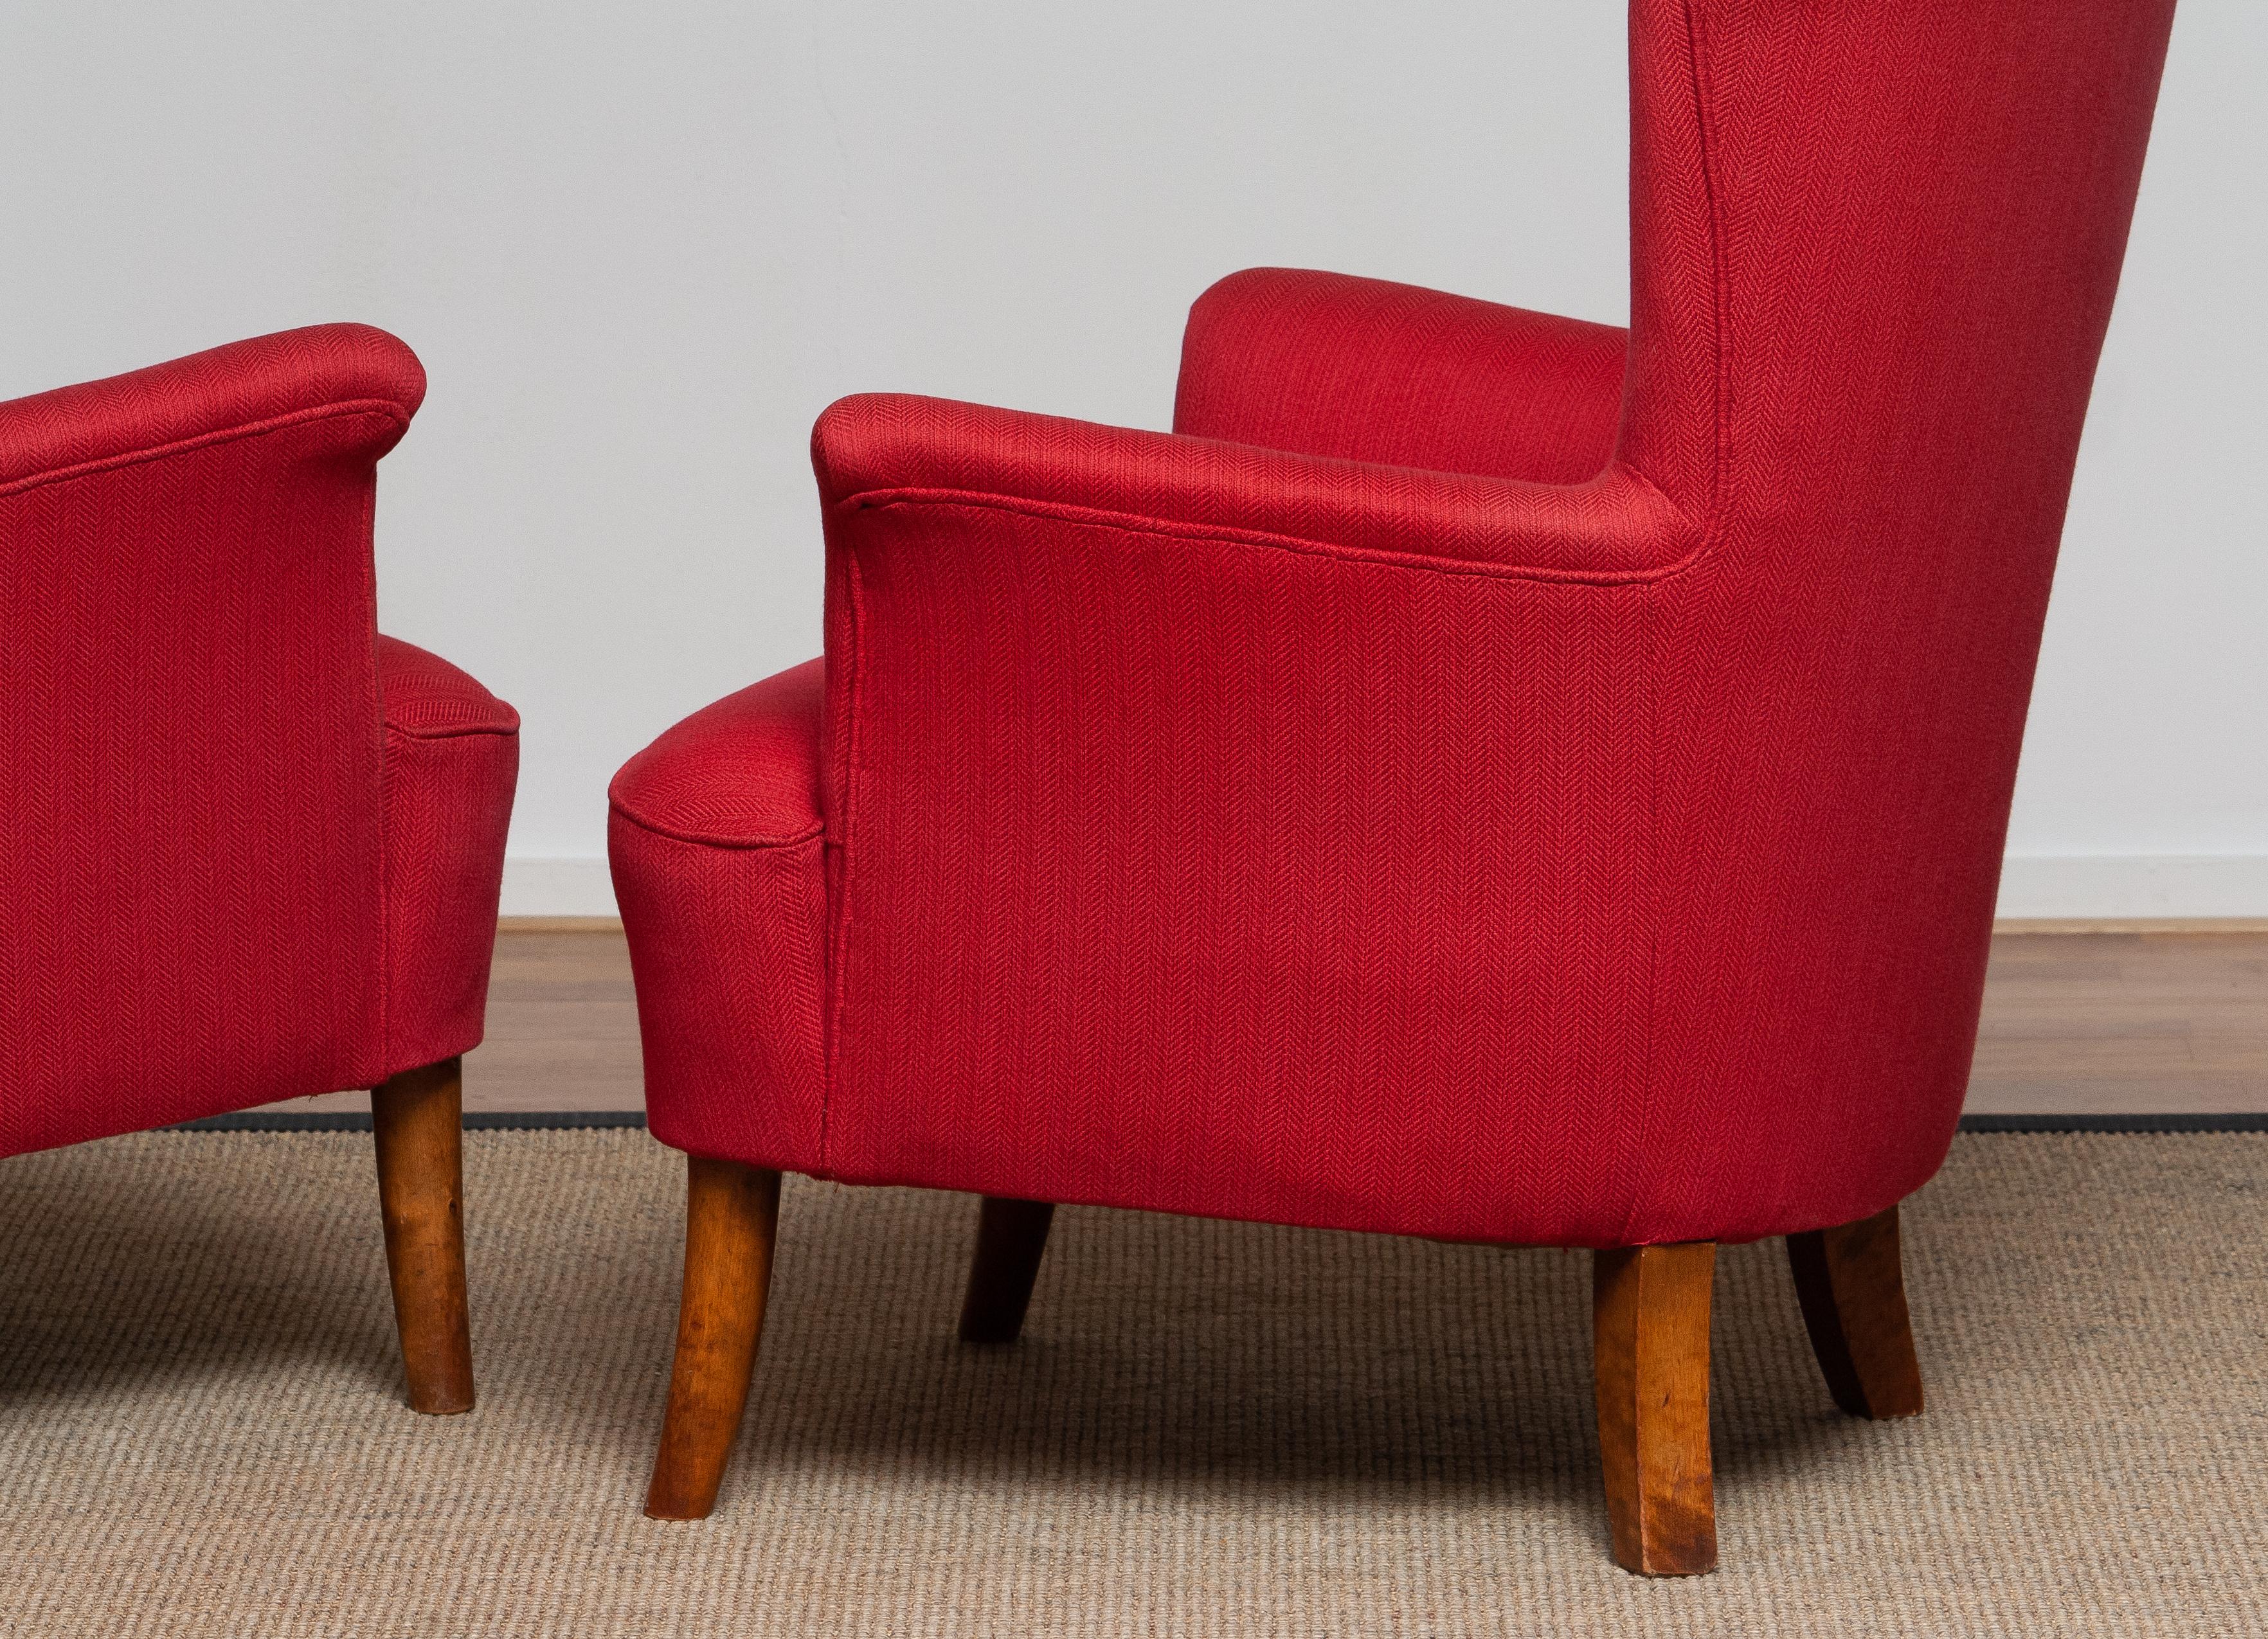 1940s, Pair of Fuchsia Easy or Lounge Chair by Carl Malmsten for Oh Sjögren 6